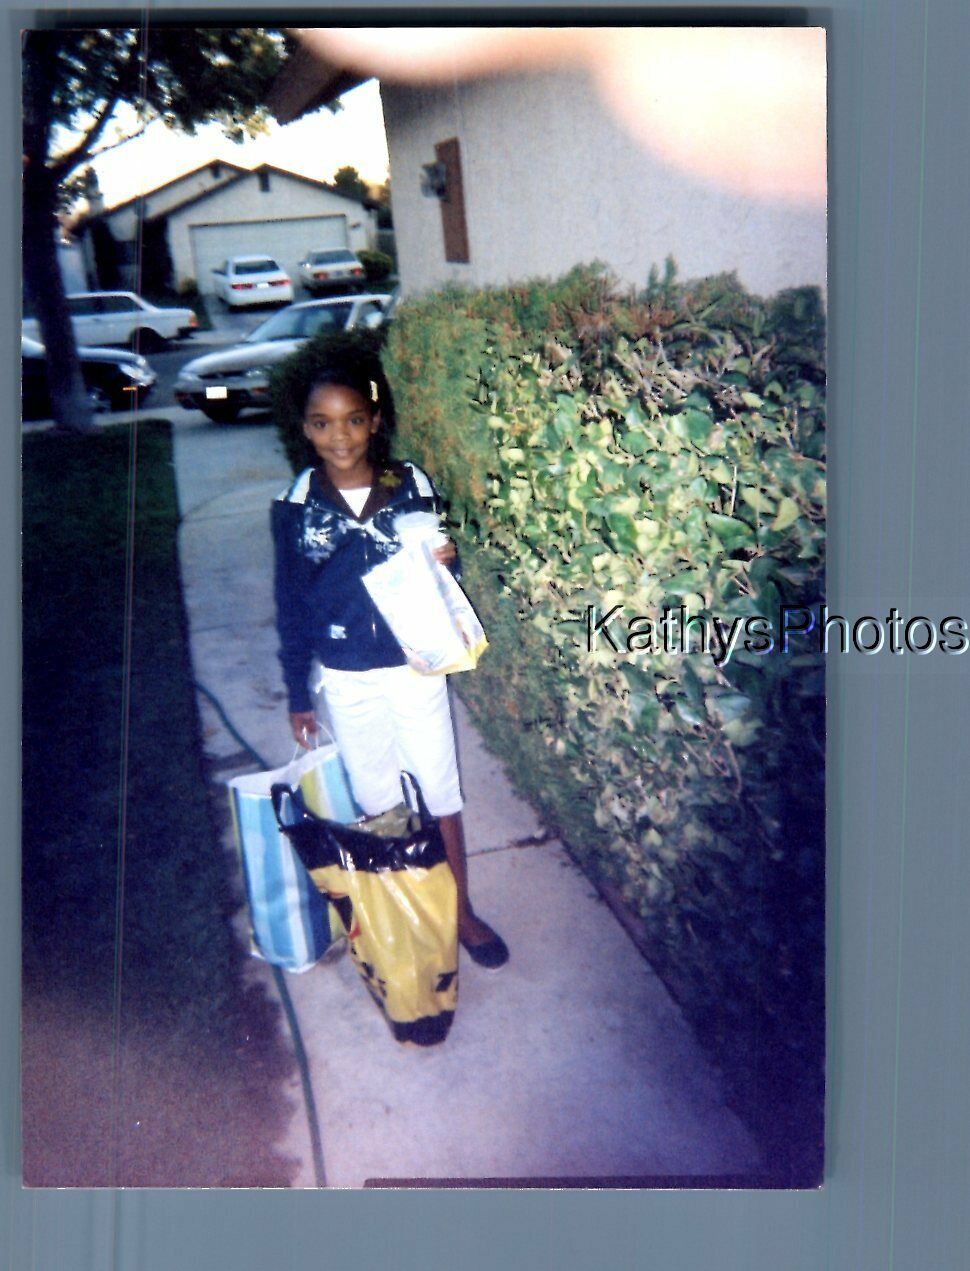 FOUND COLOR PHOTO J_1903 BLACK GIRL POSED WITH SHOPPING BAGS IN DRIVEWAY